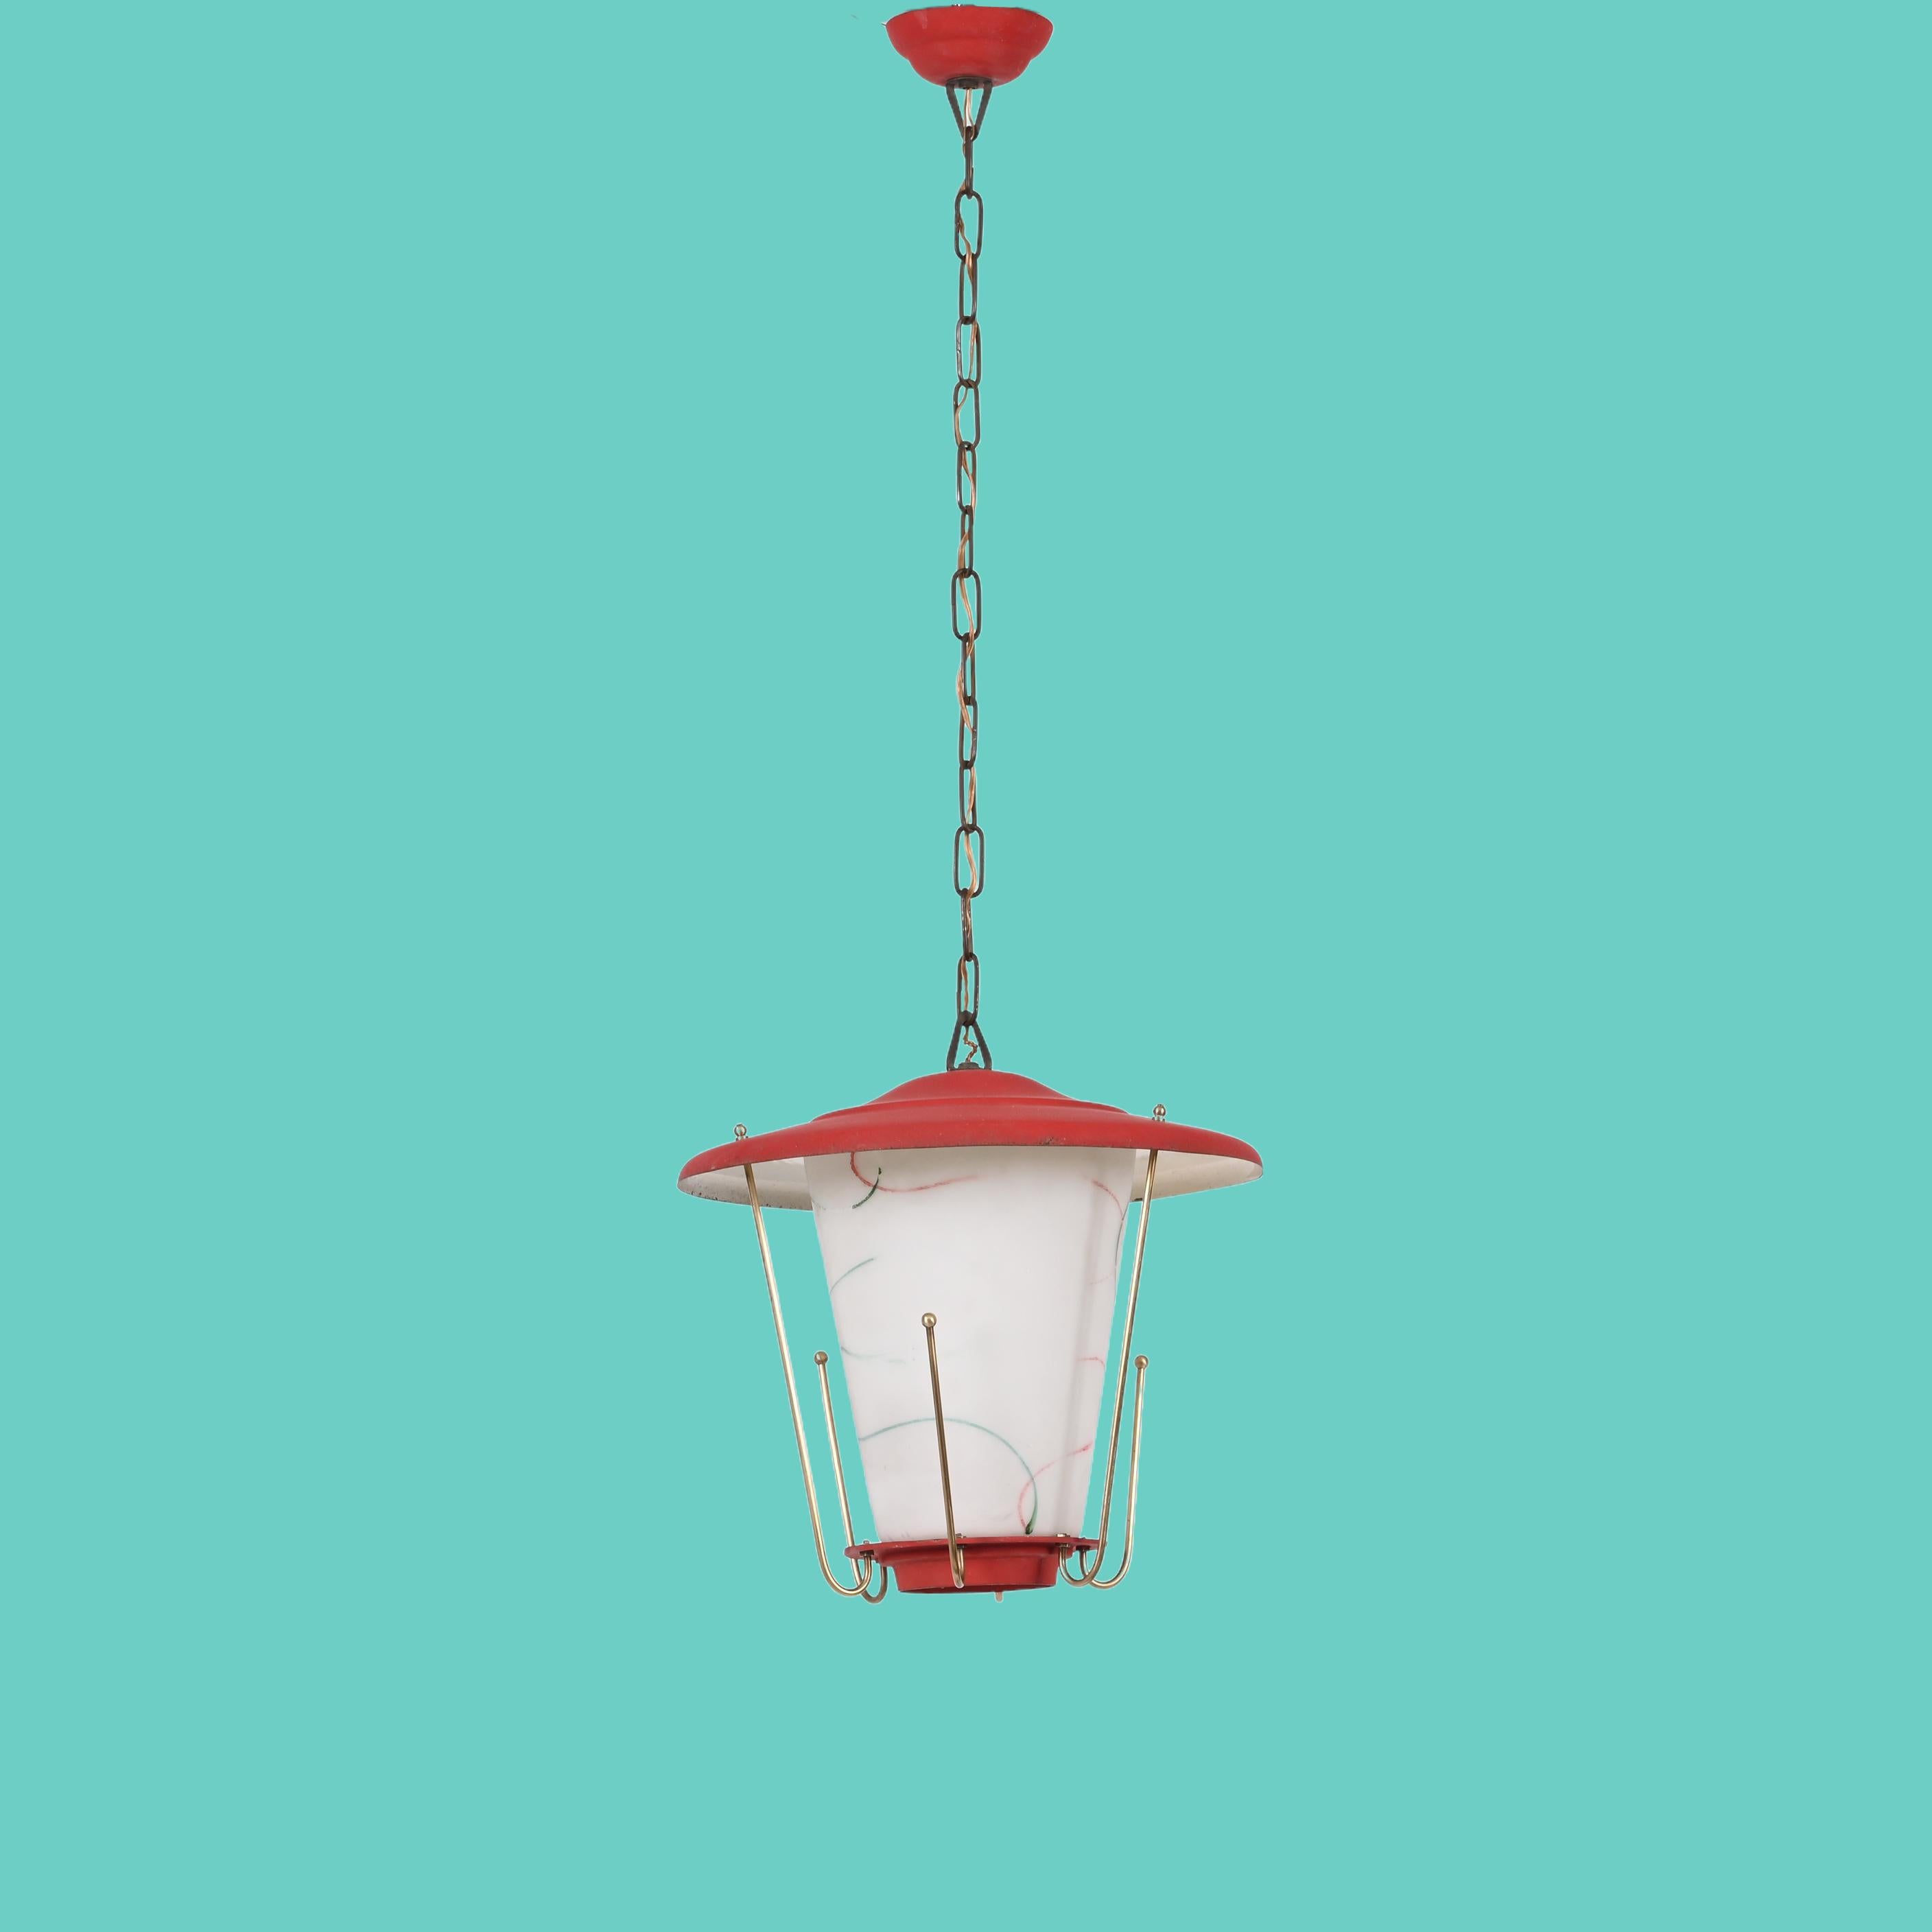 Mid-20th Century Midcentury Round Opaline Glass and Brass Italian Red Lantern Chandelier, 1950s For Sale